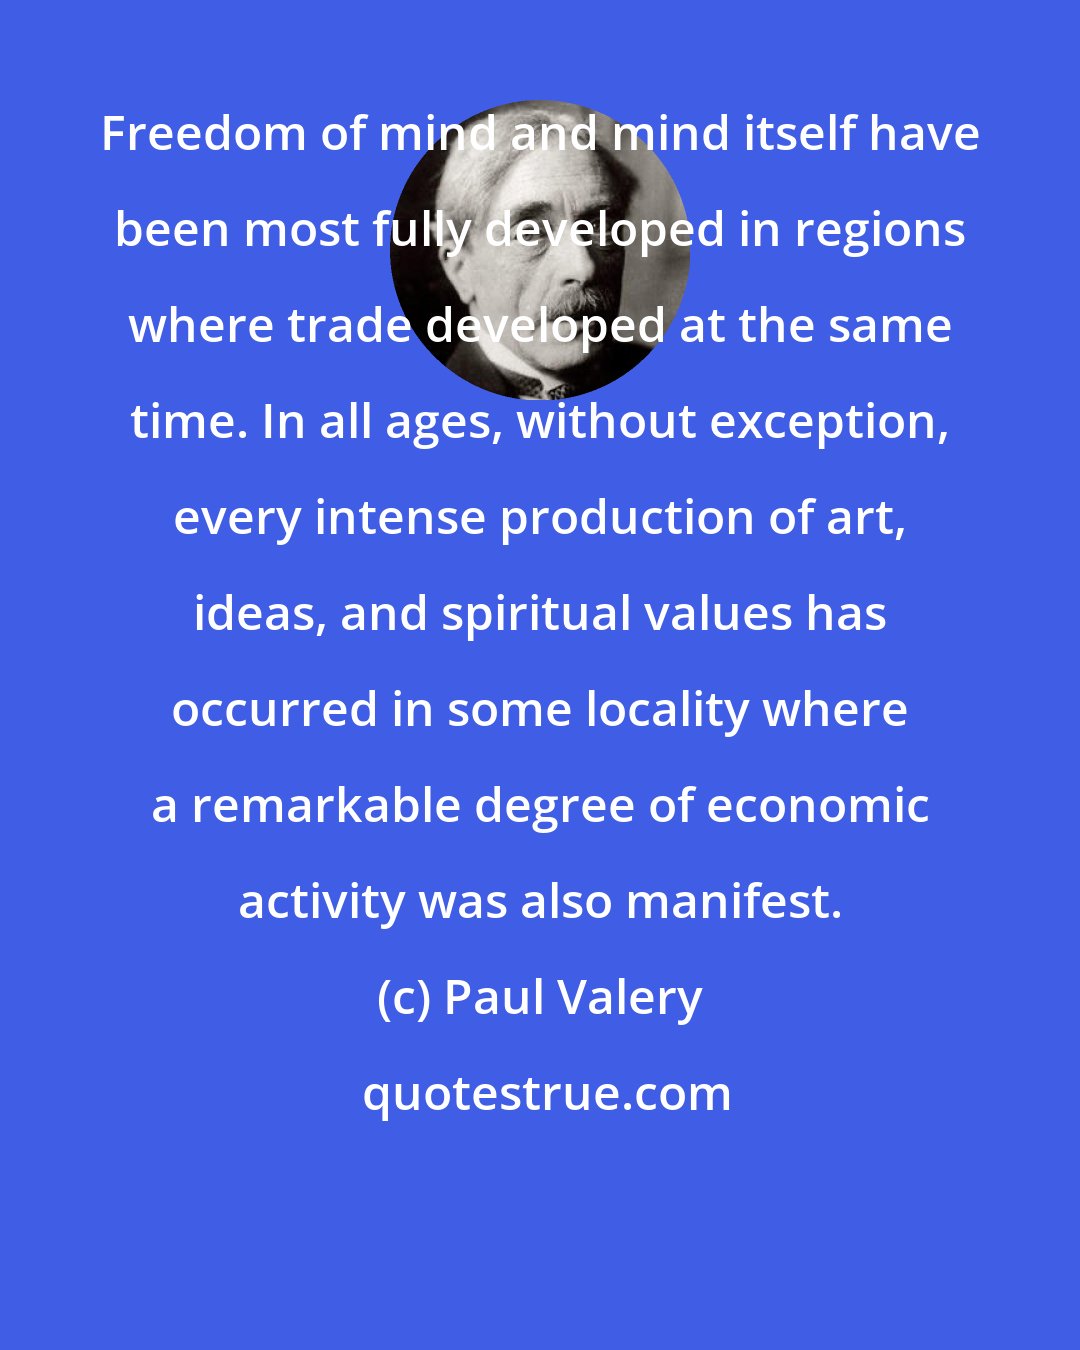 Paul Valery: Freedom of mind and mind itself have been most fully developed in regions where trade developed at the same time. In all ages, without exception, every intense production of art, ideas, and spiritual values has occurred in some locality where a remarkable degree of economic activity was also manifest.